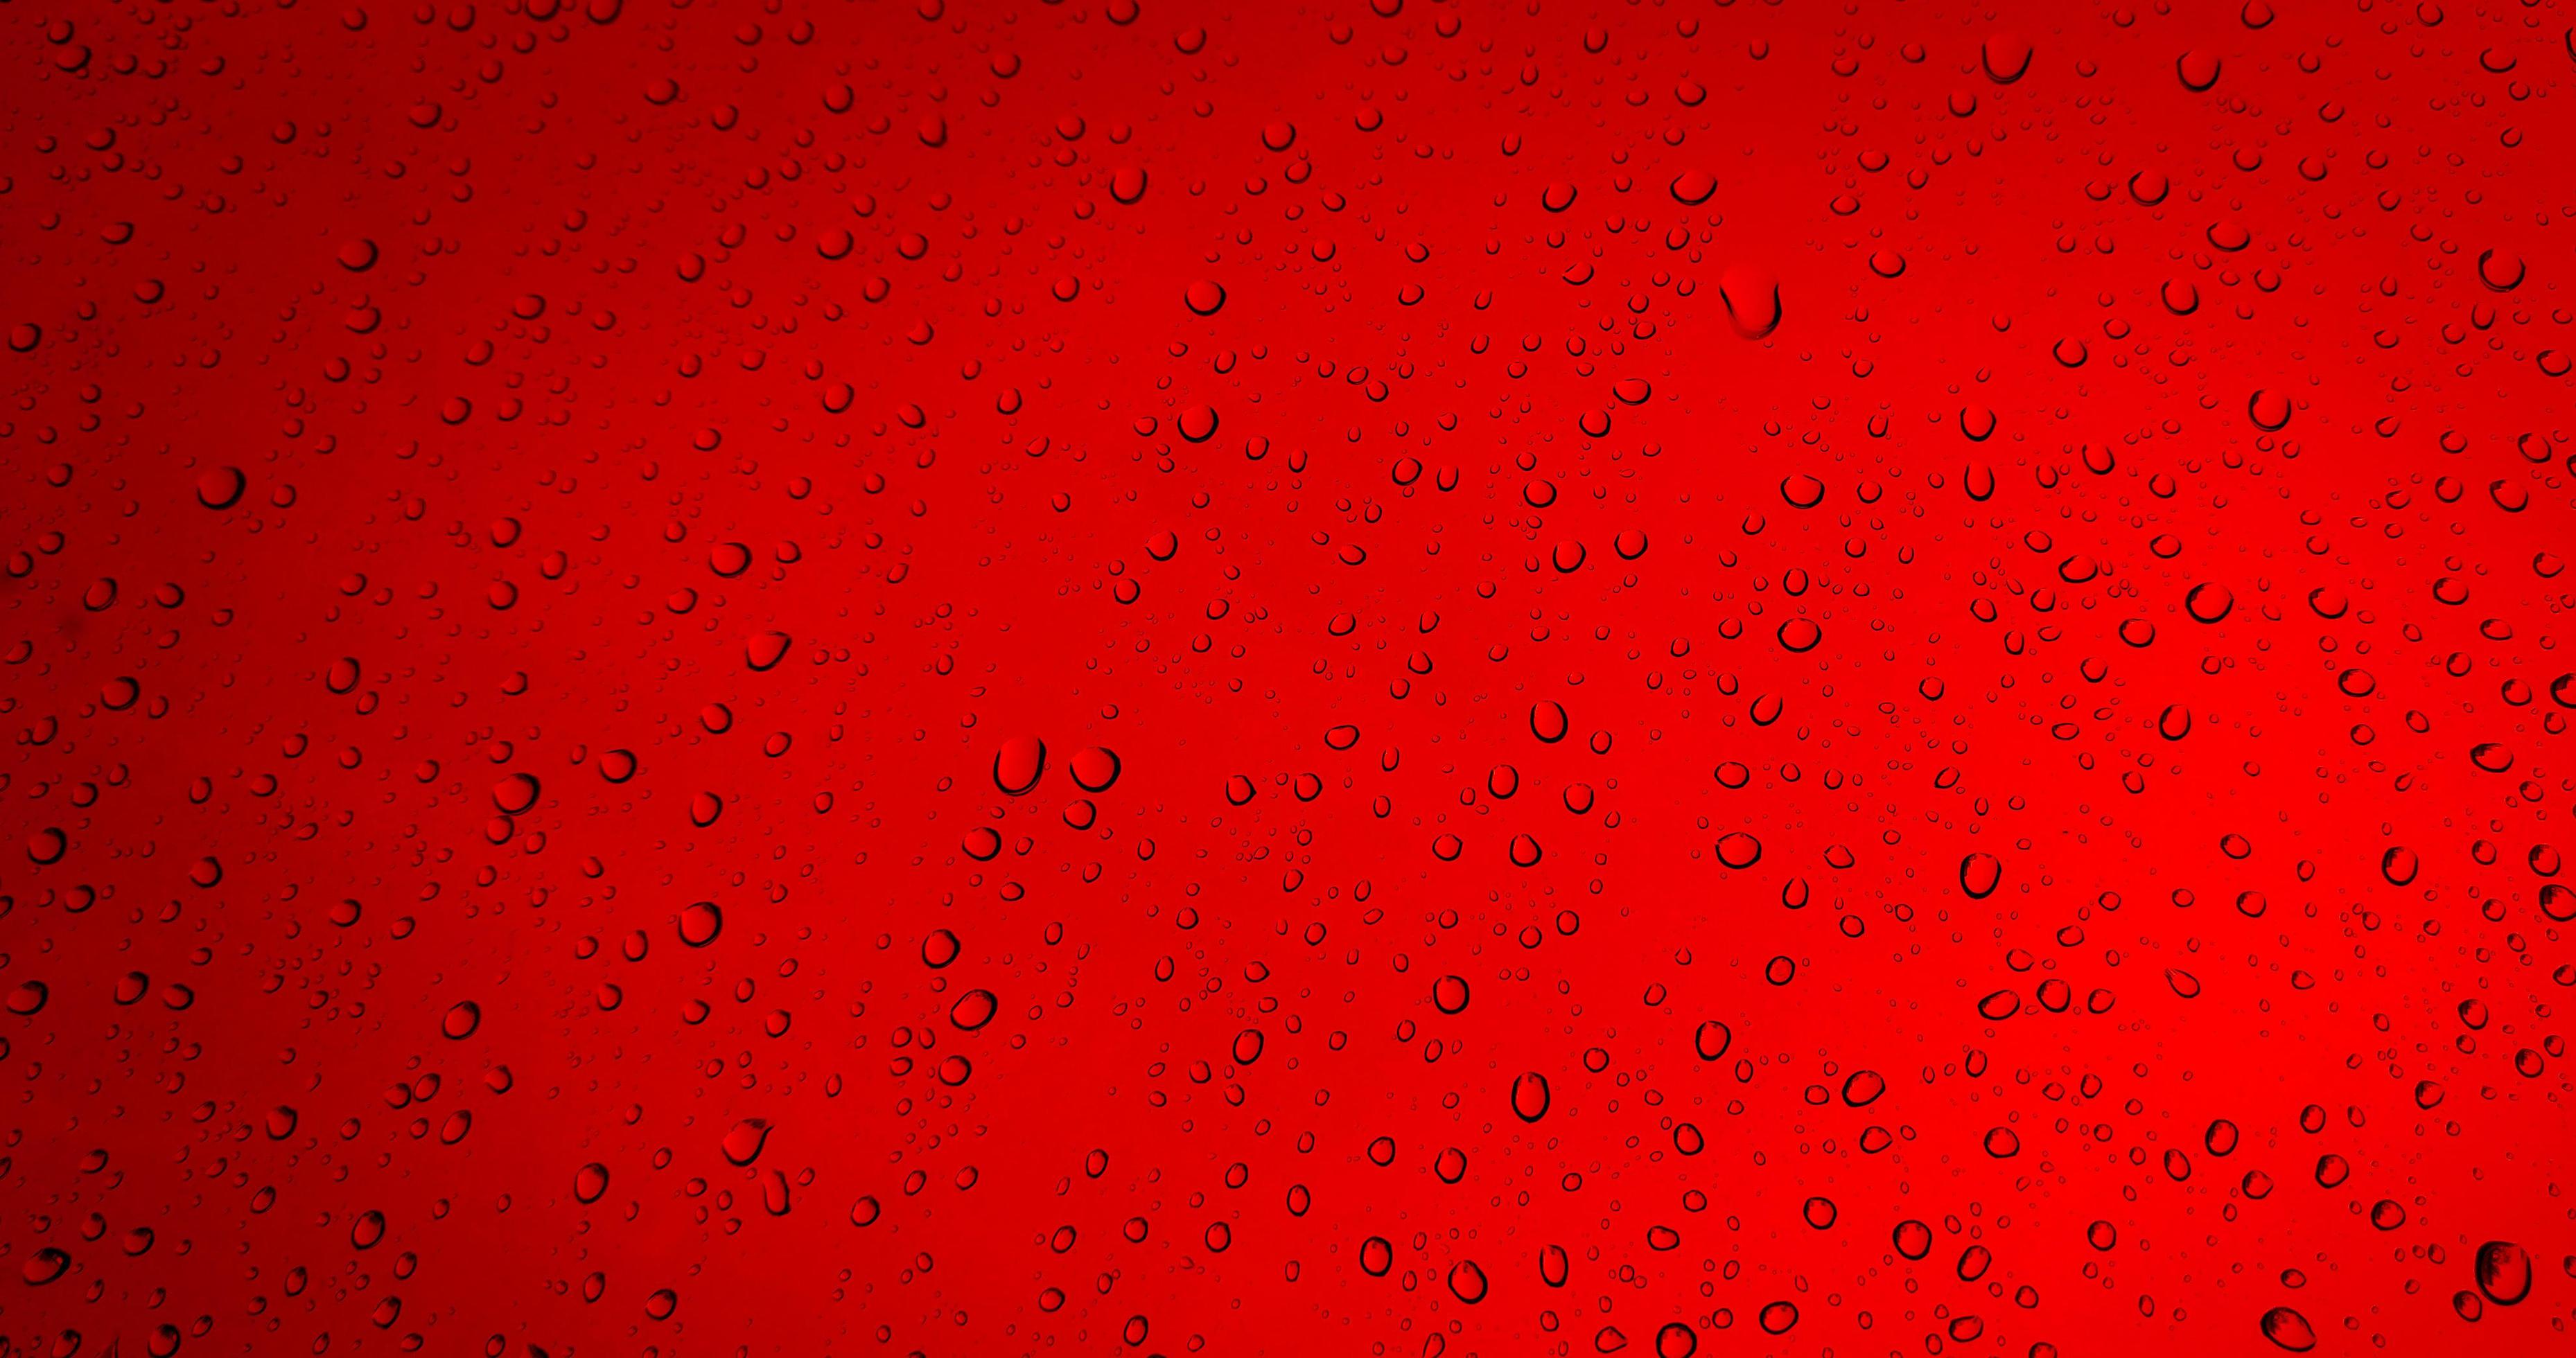 Rain drops on red glass window background 3389275 Stock Photo at Vecteezy